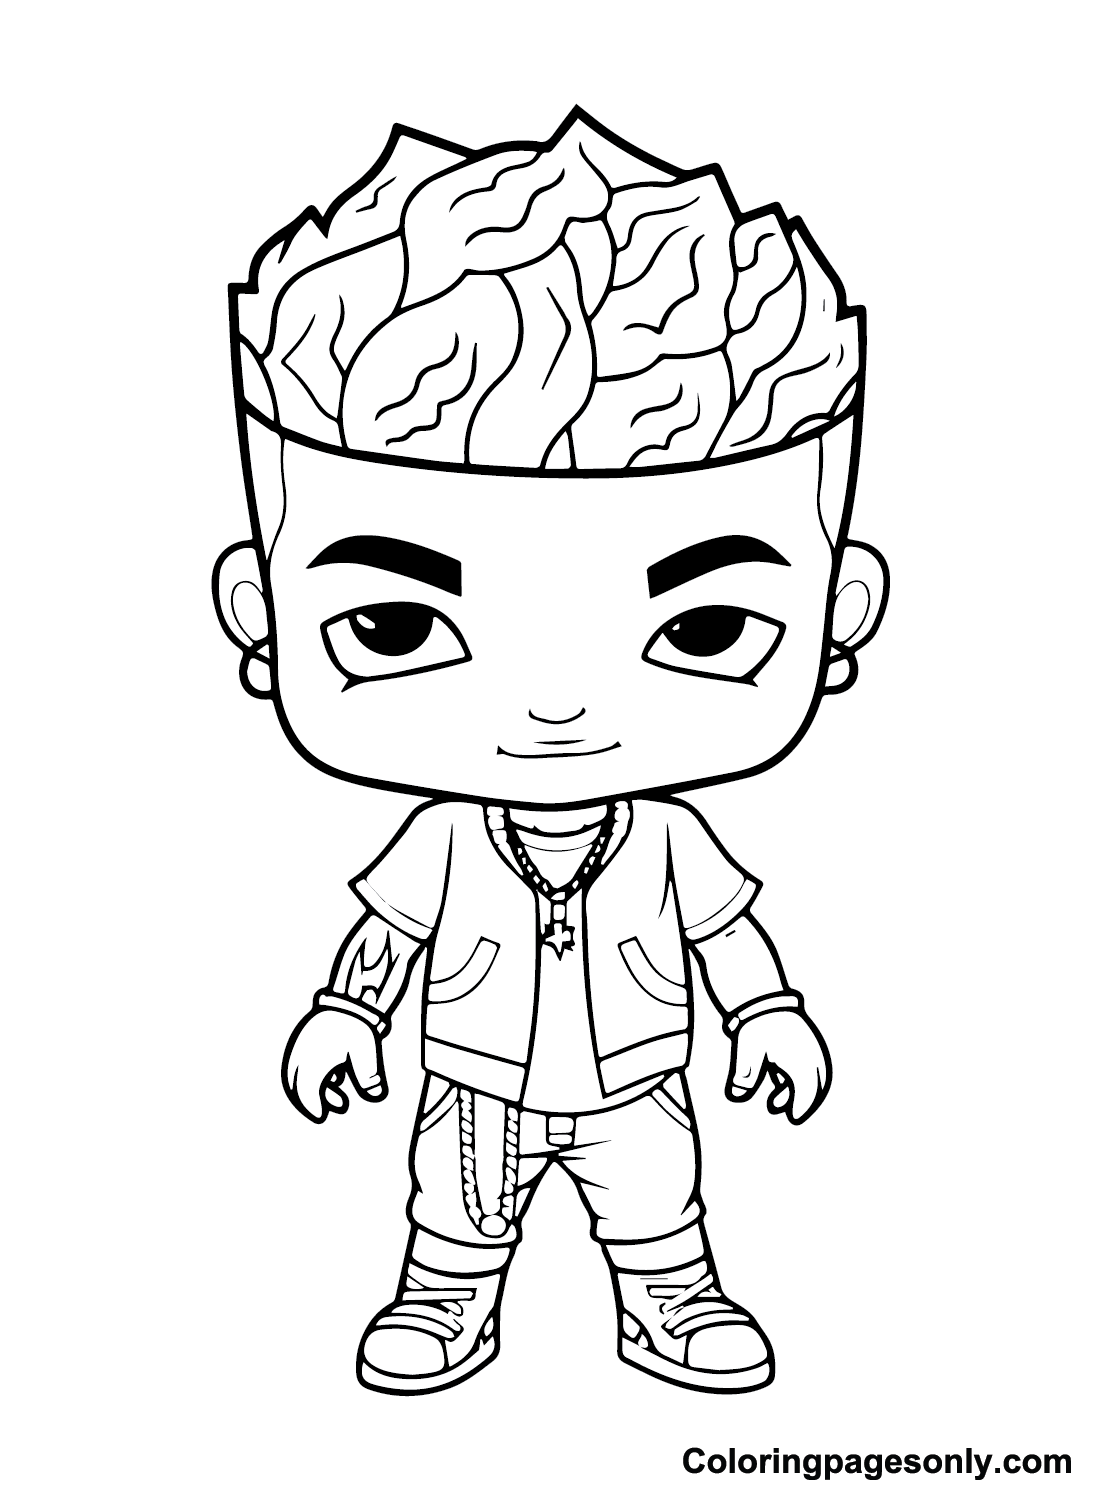 Chibi Blueface images Coloring Page